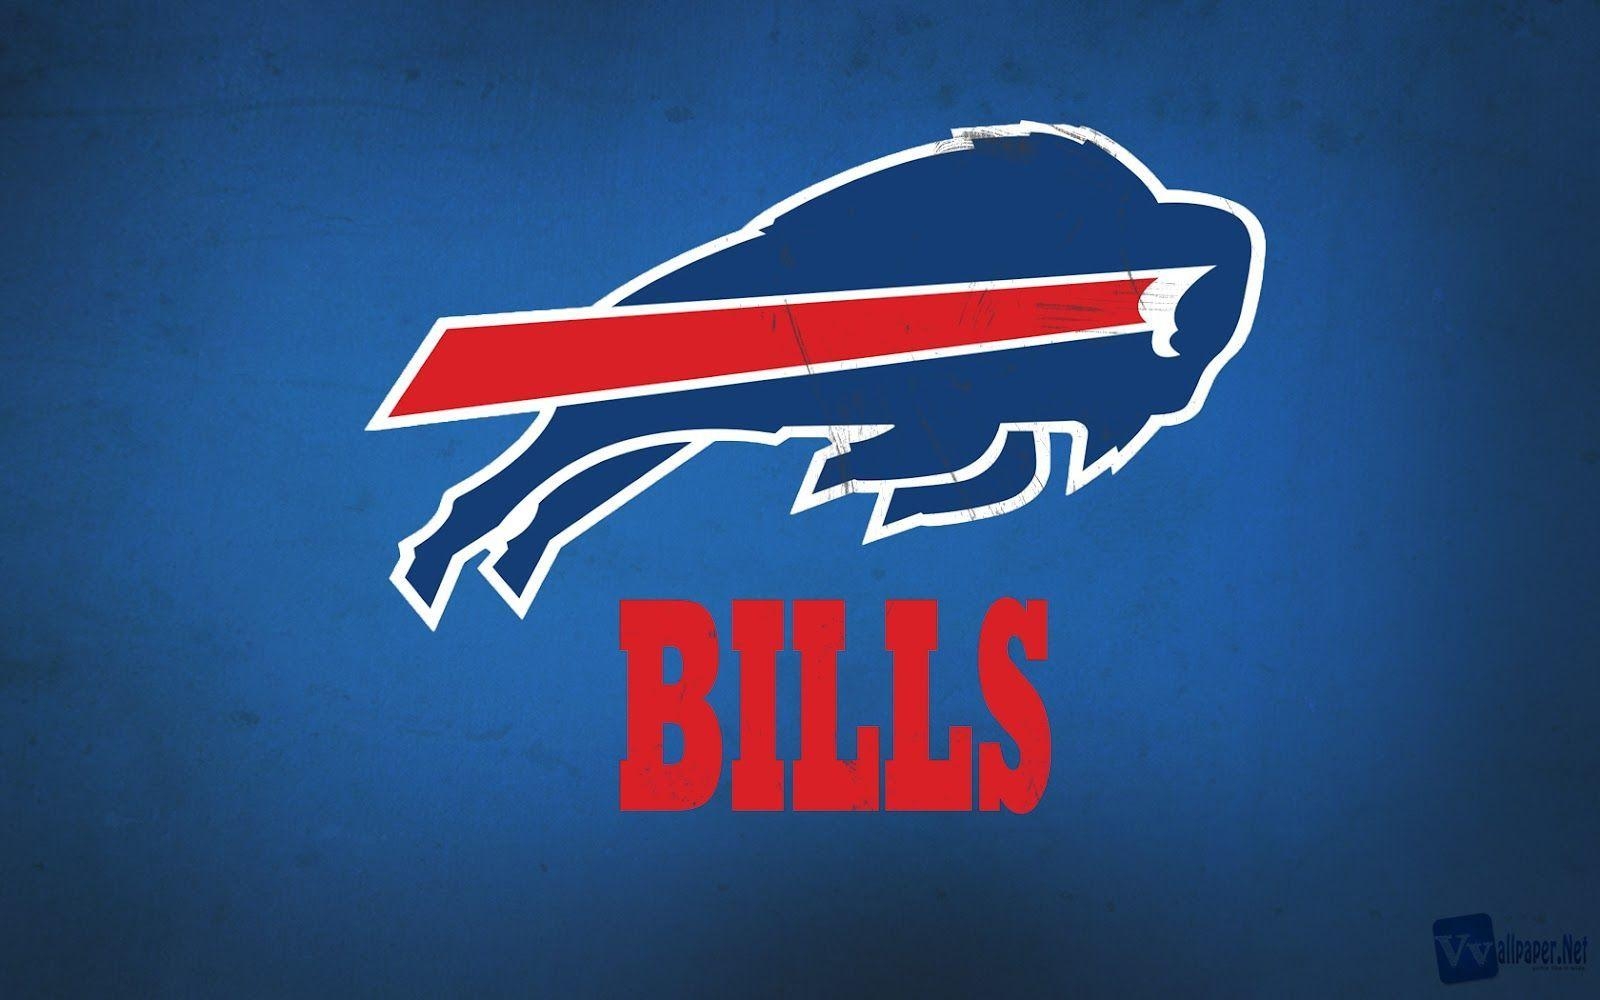 buffalo bills game today play by play